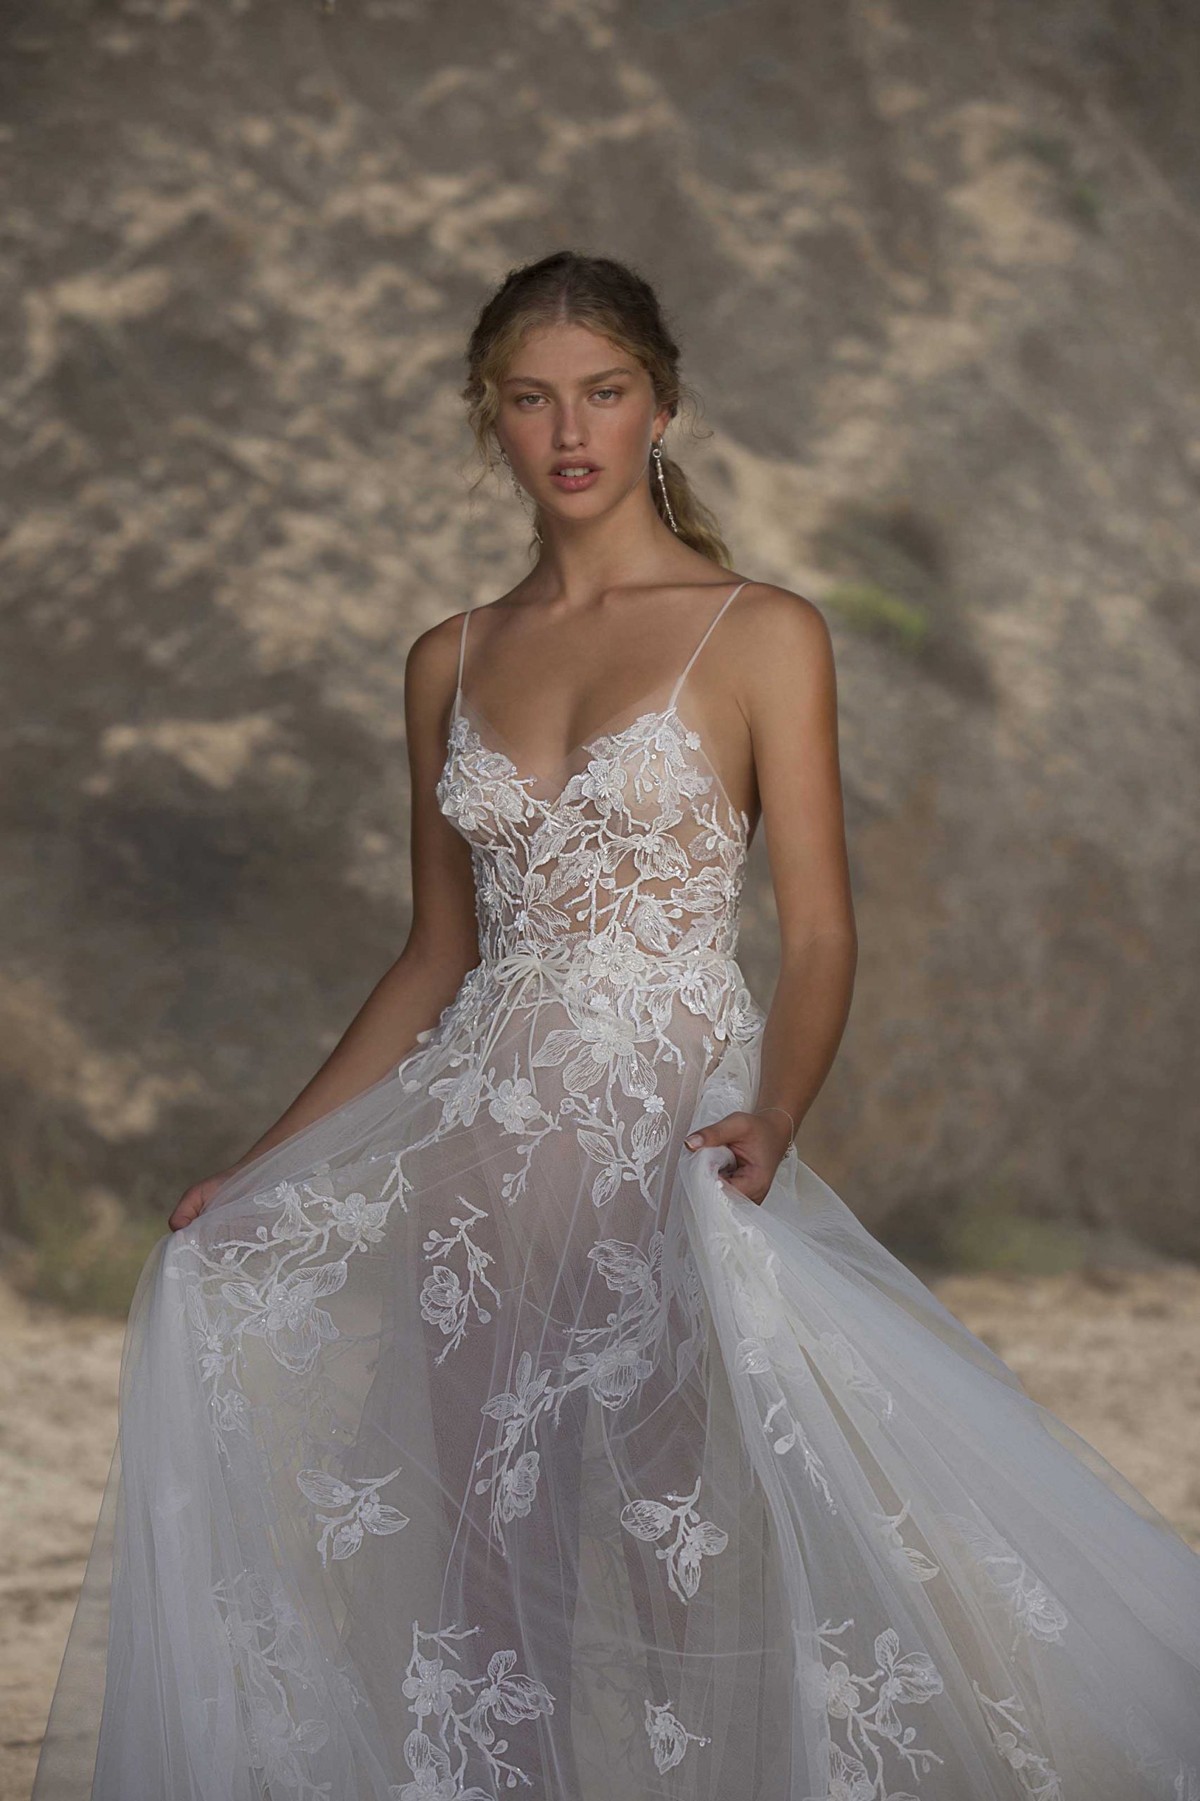 21-HELENA Bridal Dress Inspirated By Berta Muse 2021 Vista Mare Collection